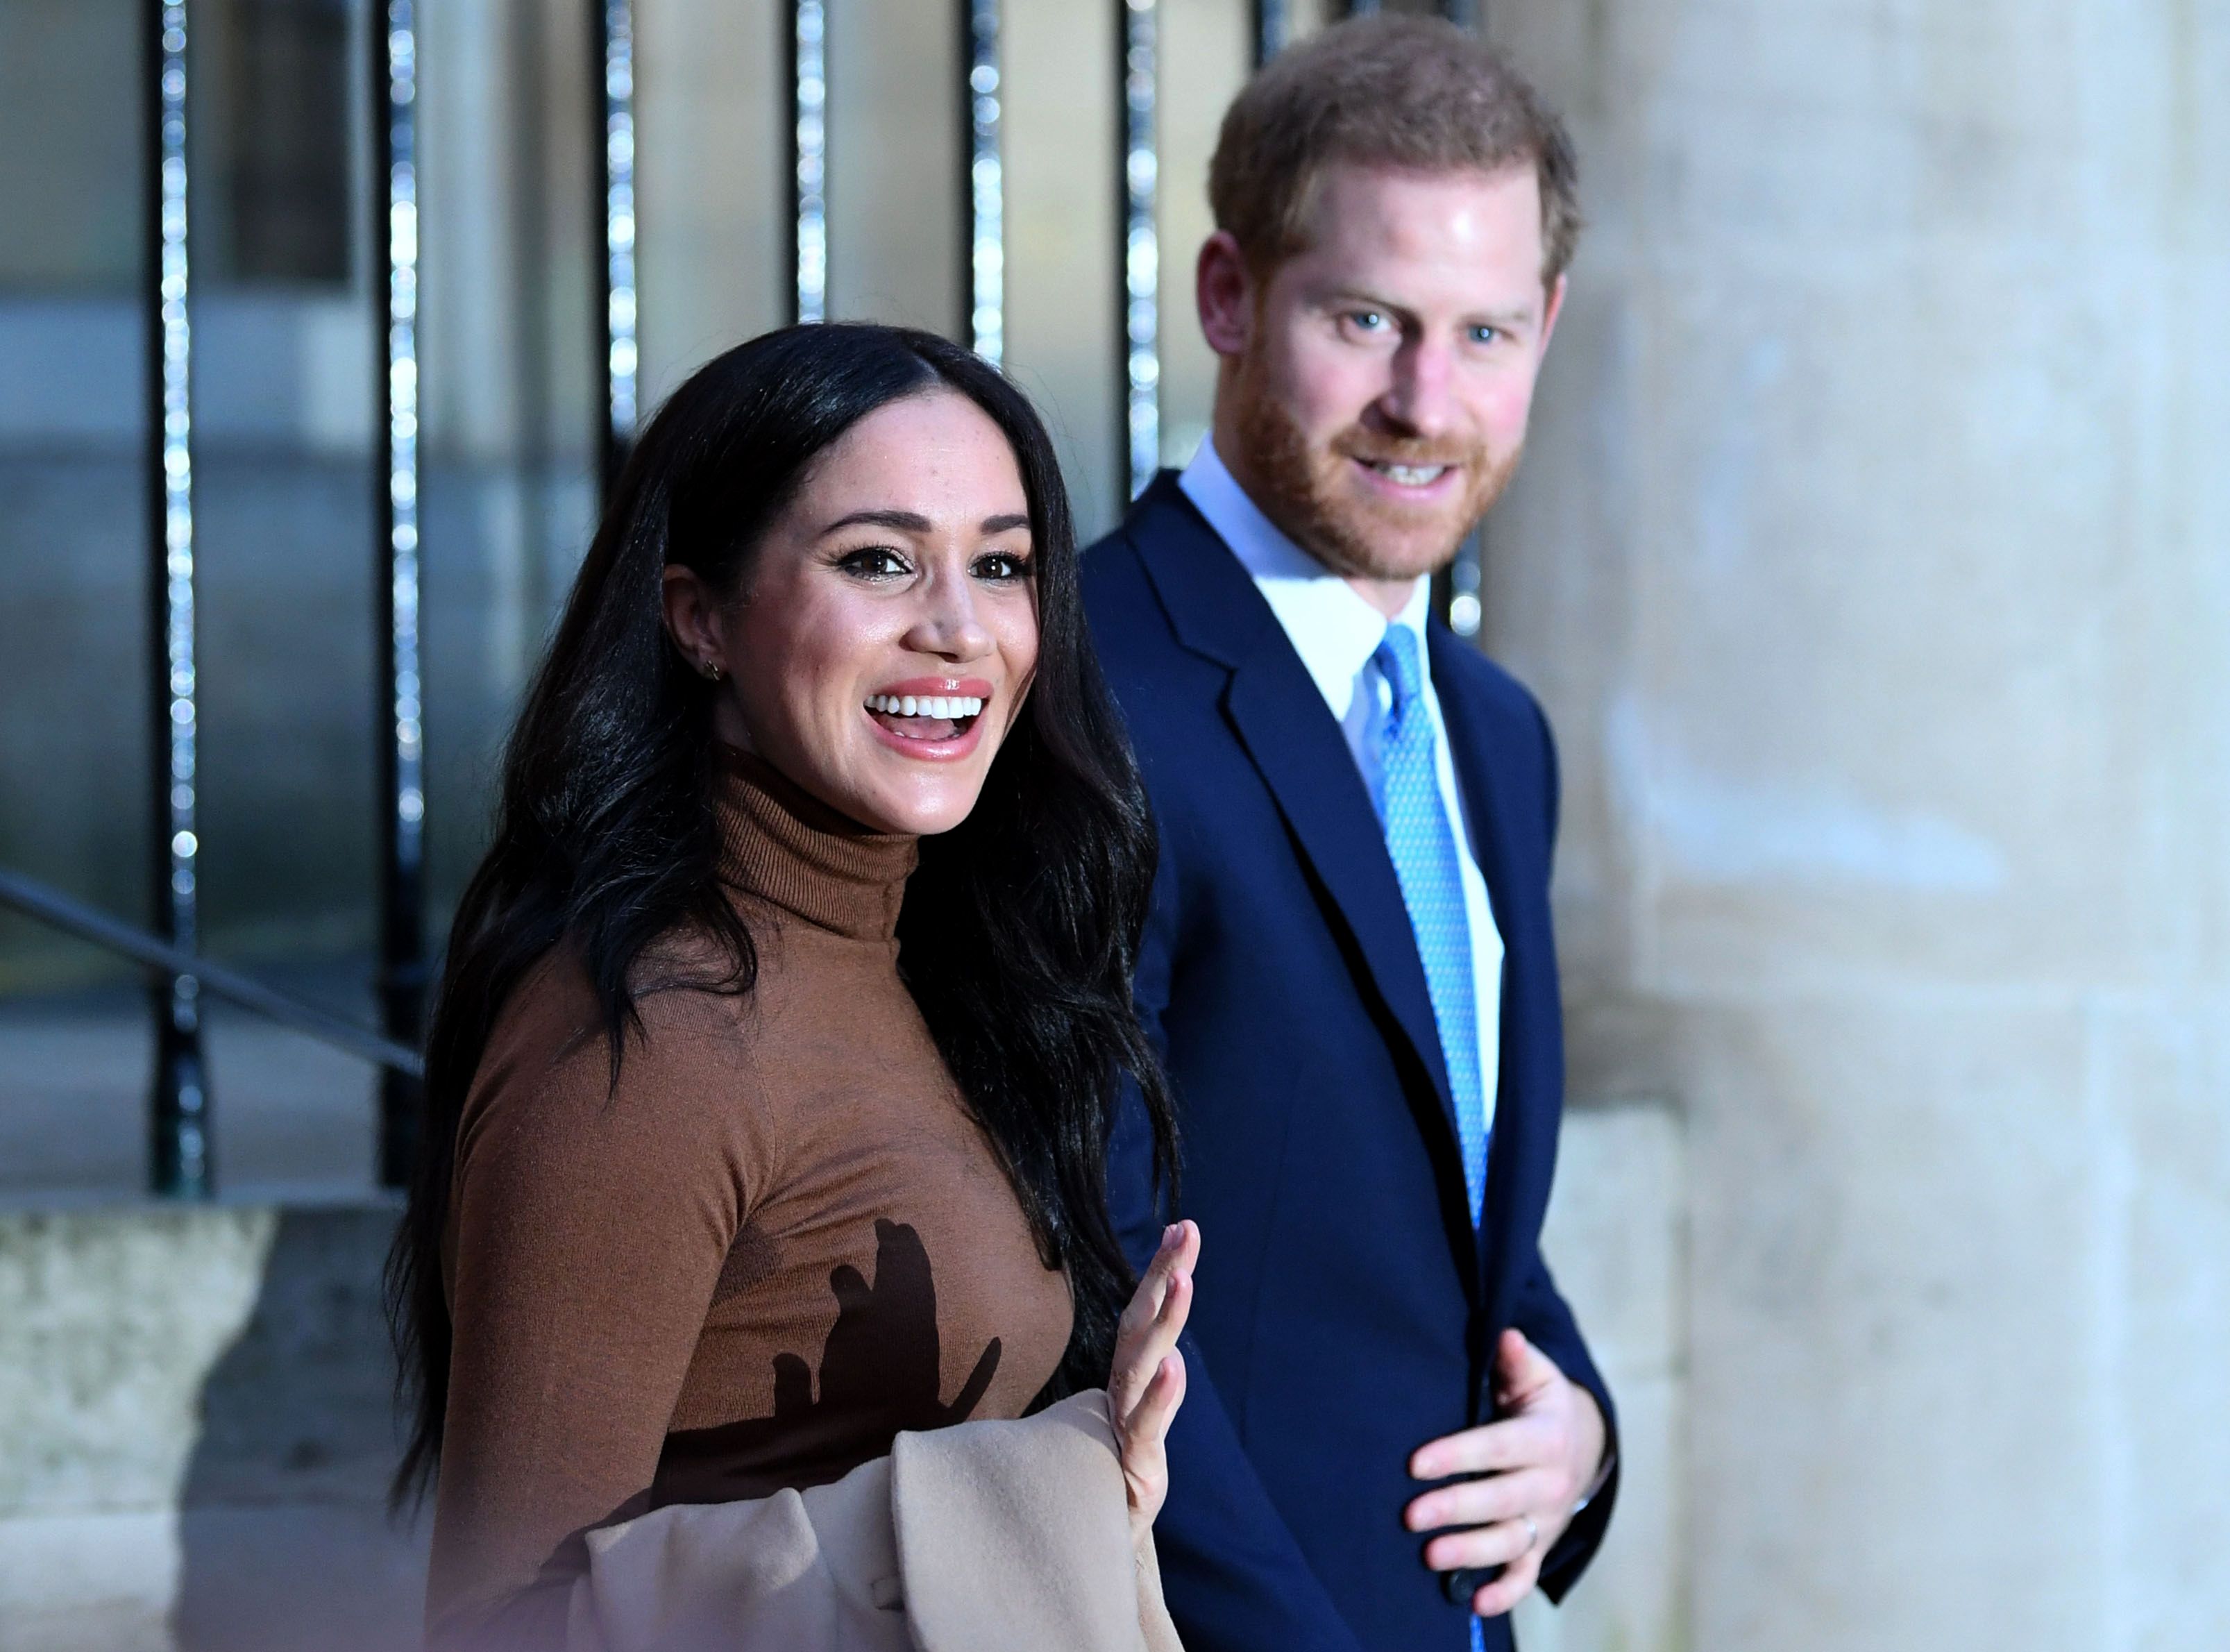 Duchess Meghan and Prince Harry after their visit to Canada House during their stay in Canada, on January 7, 2020, in London, England | Photo: Daniel Leal-Olivas WPA Pool/Getty Images